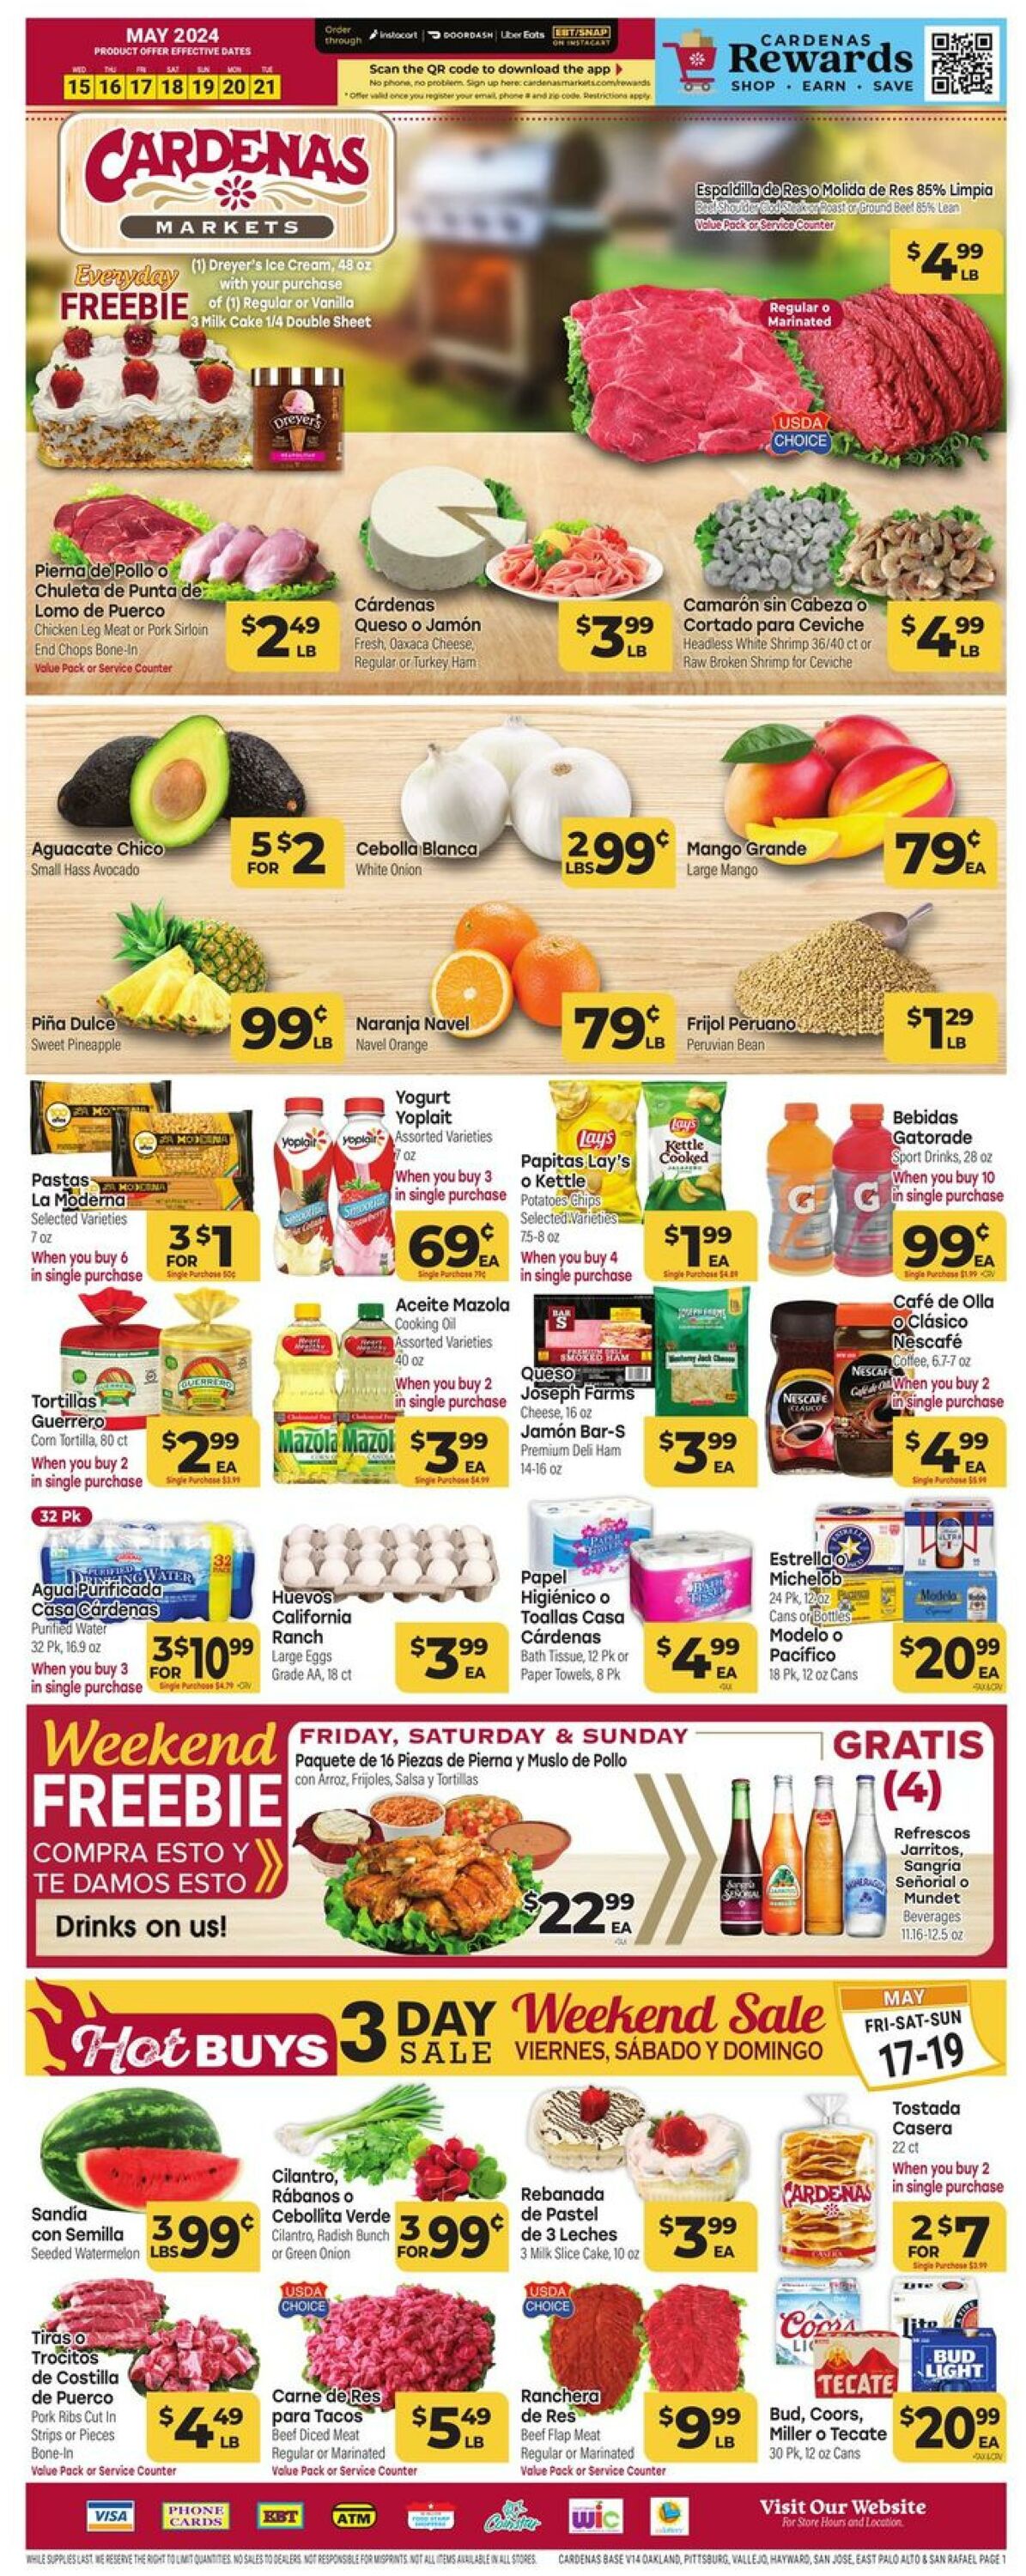 Cardenas Markets Promotional weekly ads